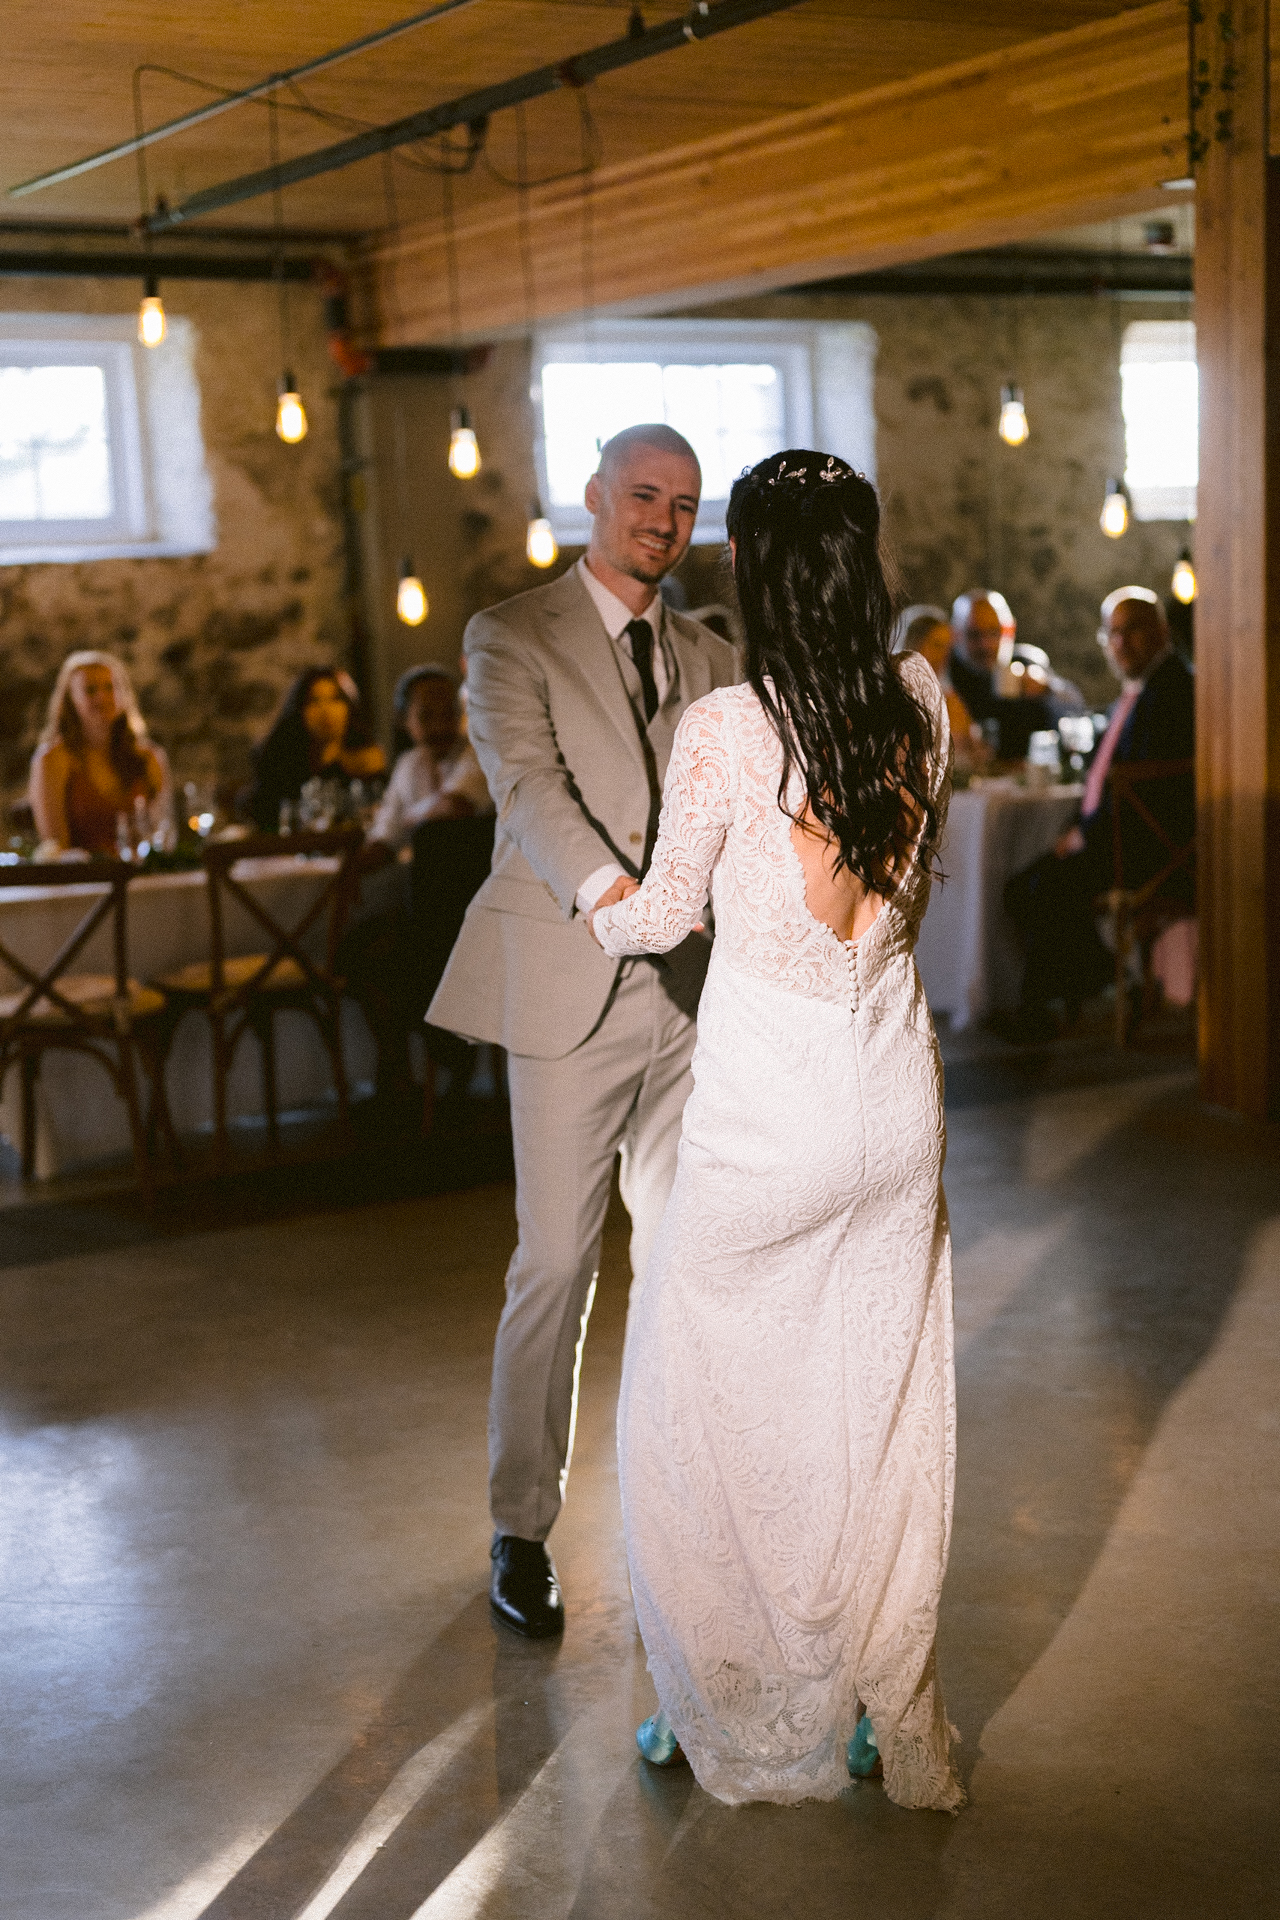 A couple sharing a dance in a warmly lit venue, with guests seated in the background